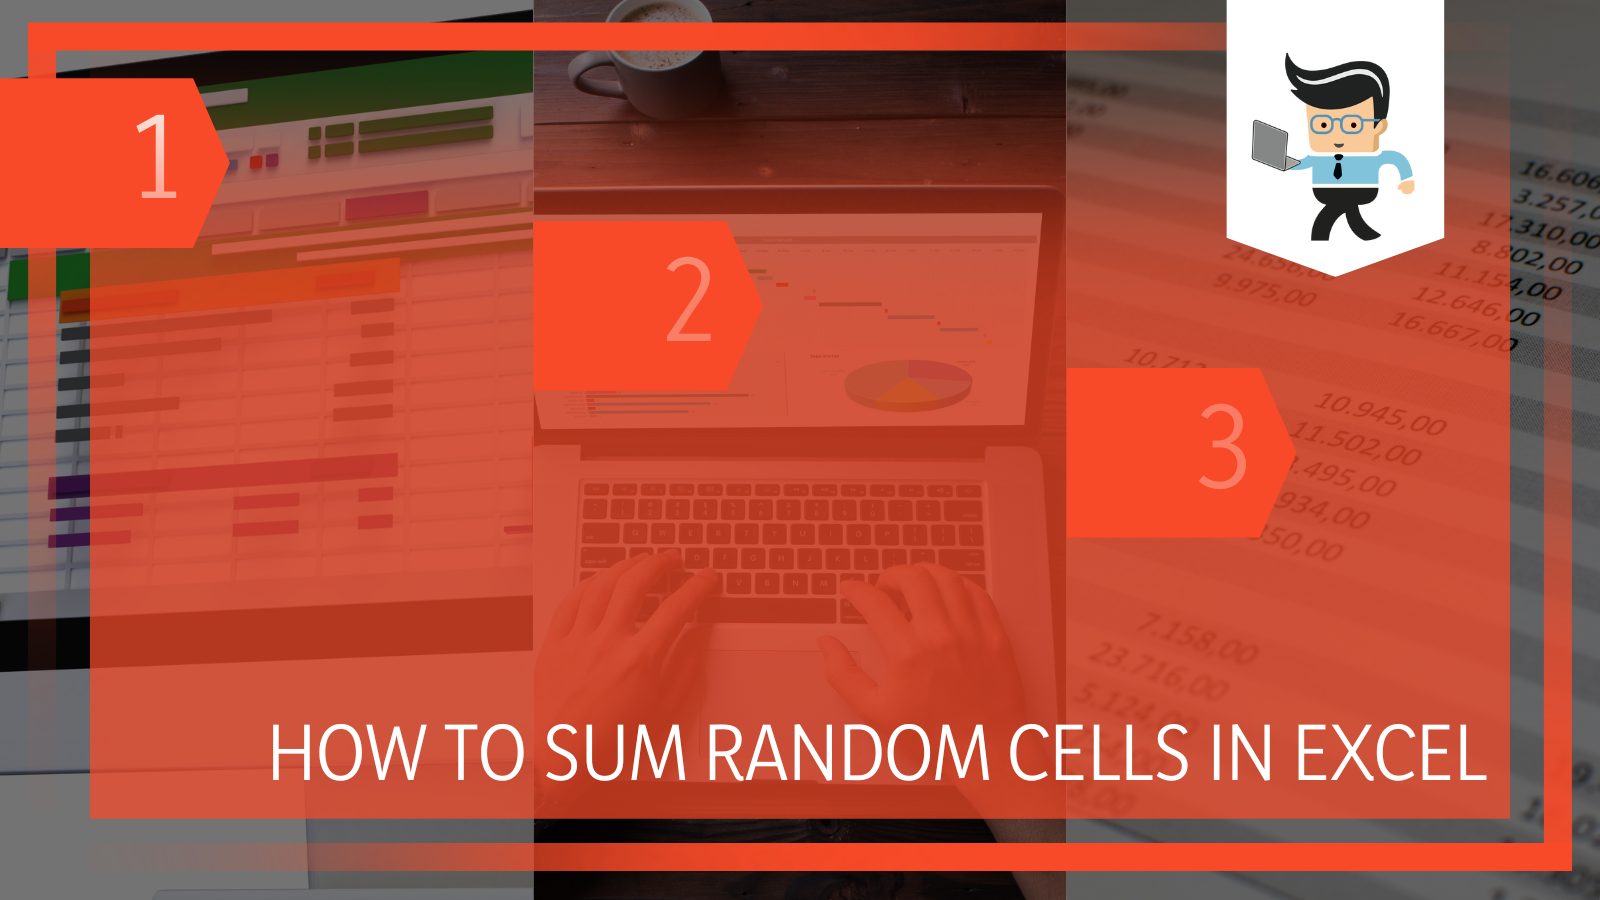 How To Sum Random Cells in Excel